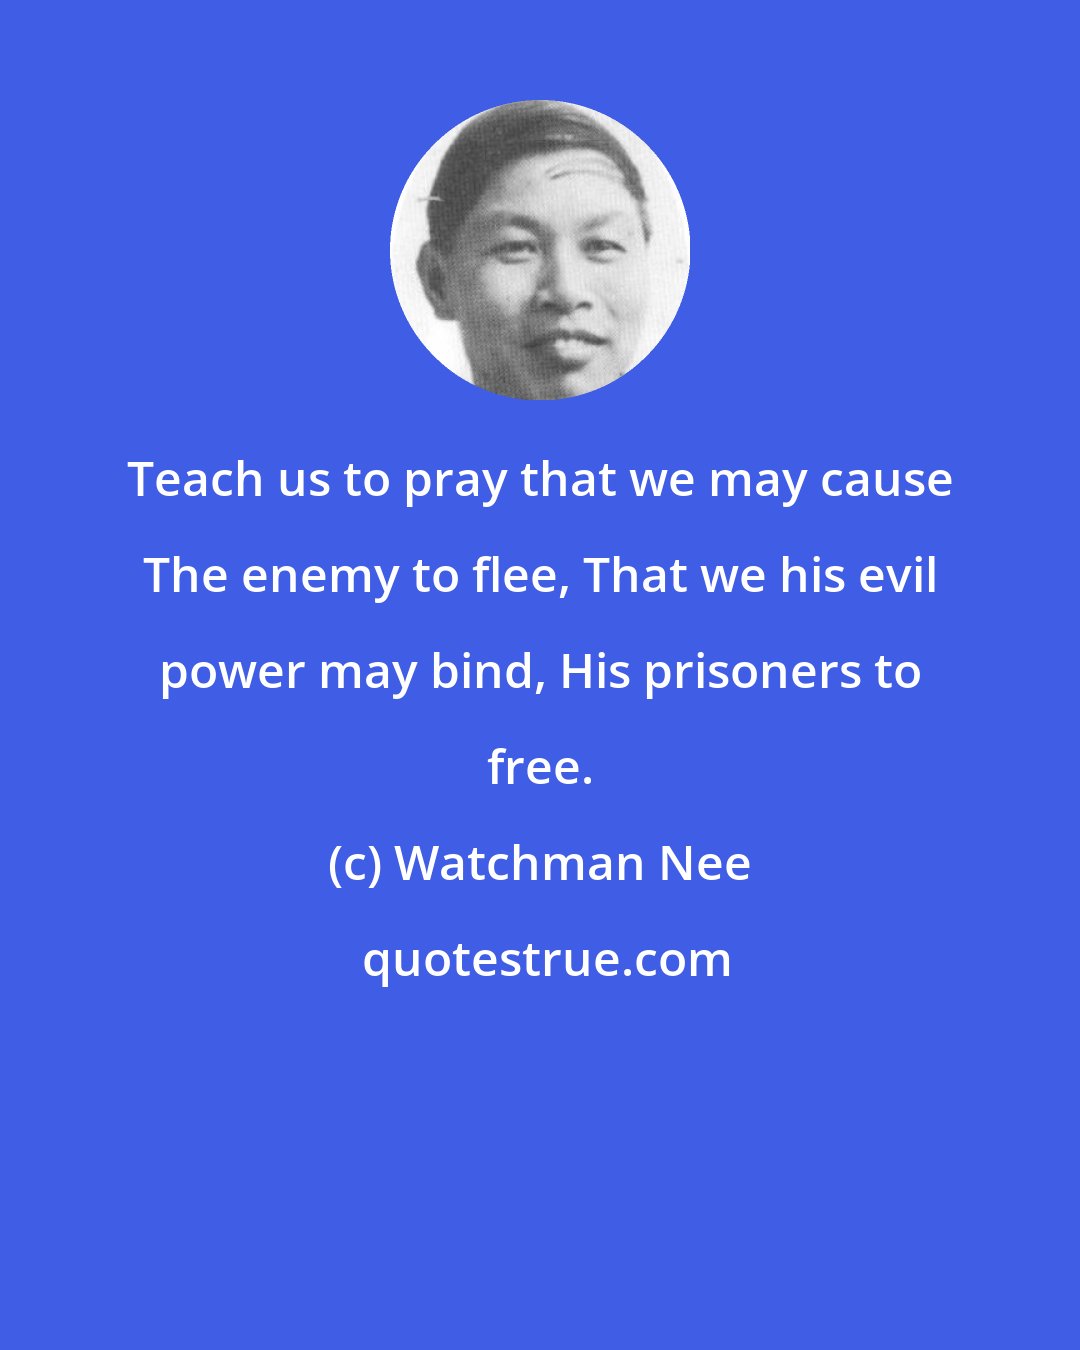 Watchman Nee: Teach us to pray that we may cause The enemy to flee, That we his evil power may bind, His prisoners to free.